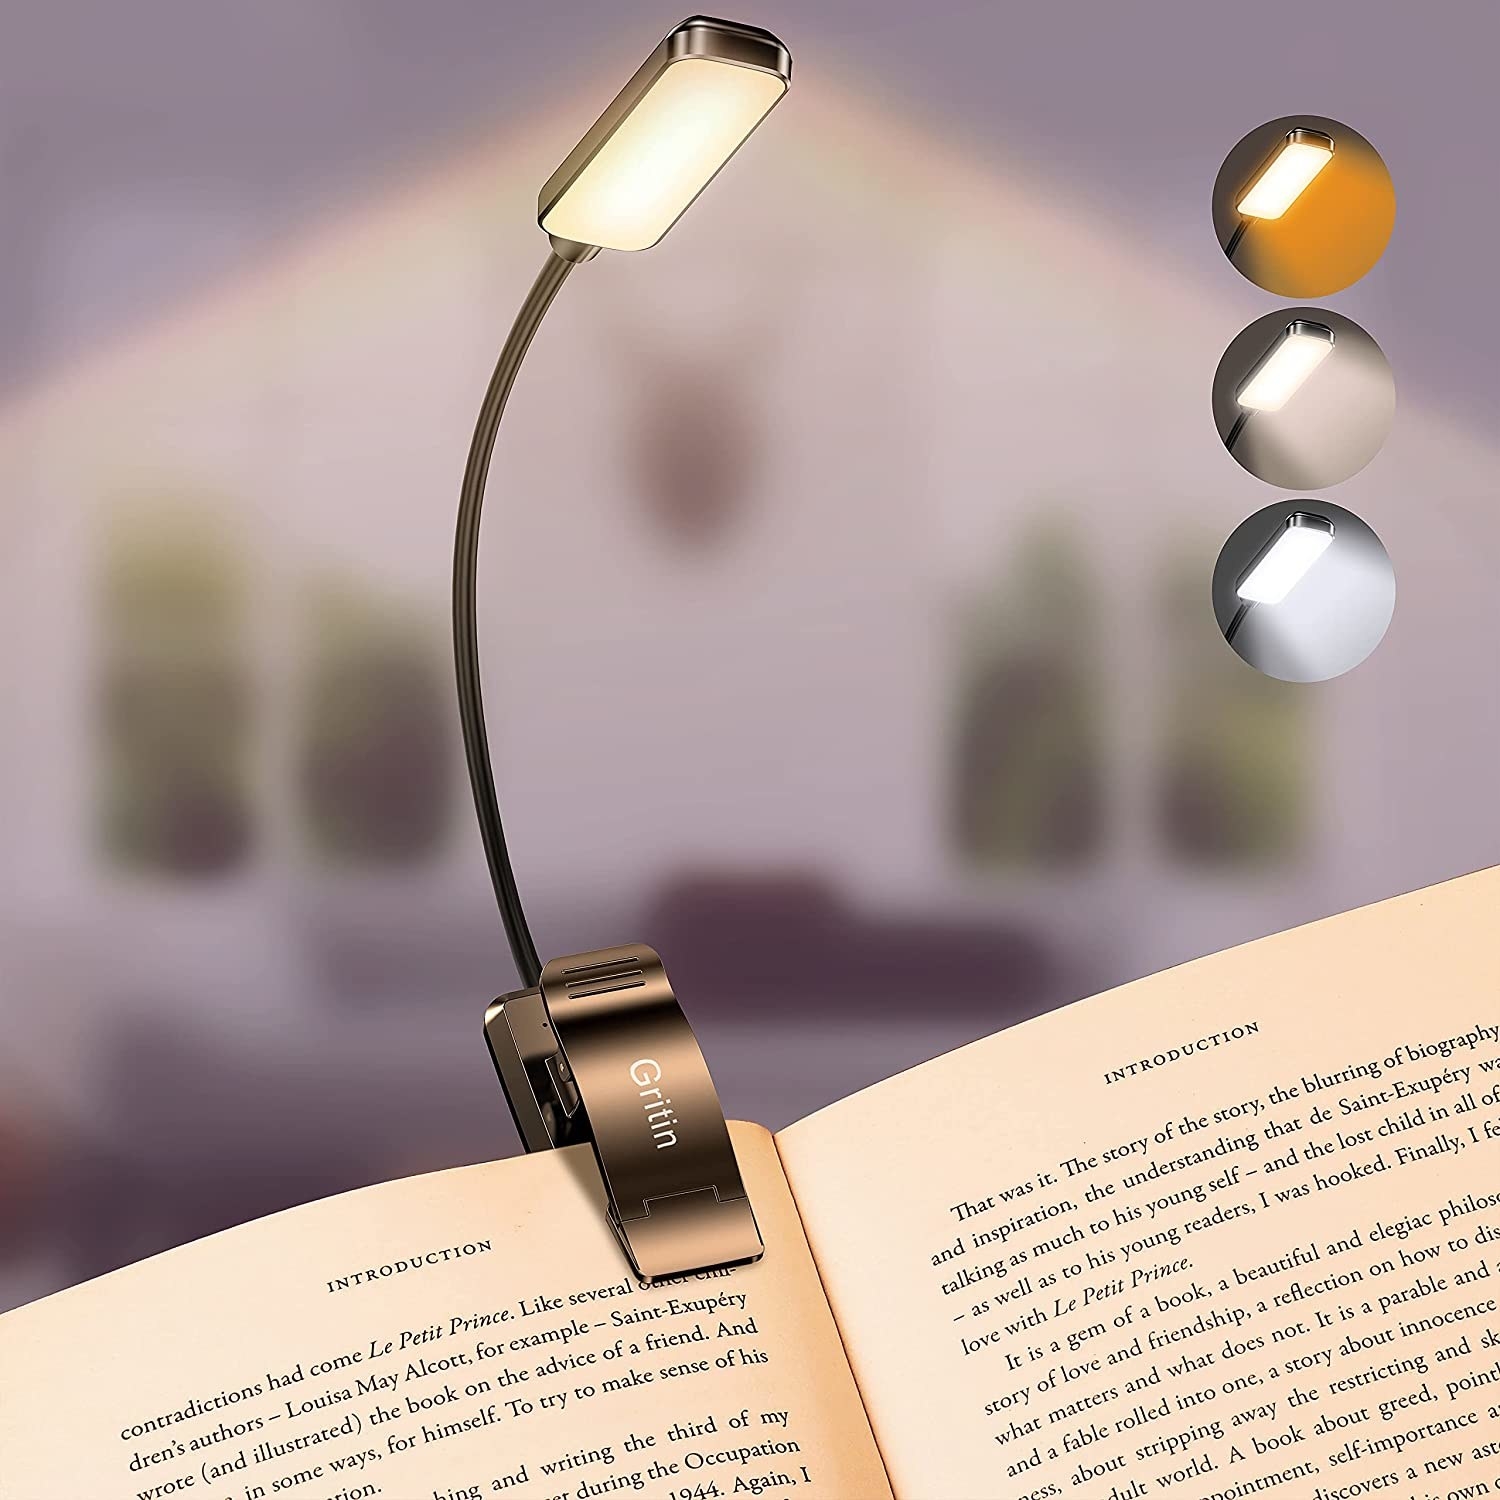 The book light on a book